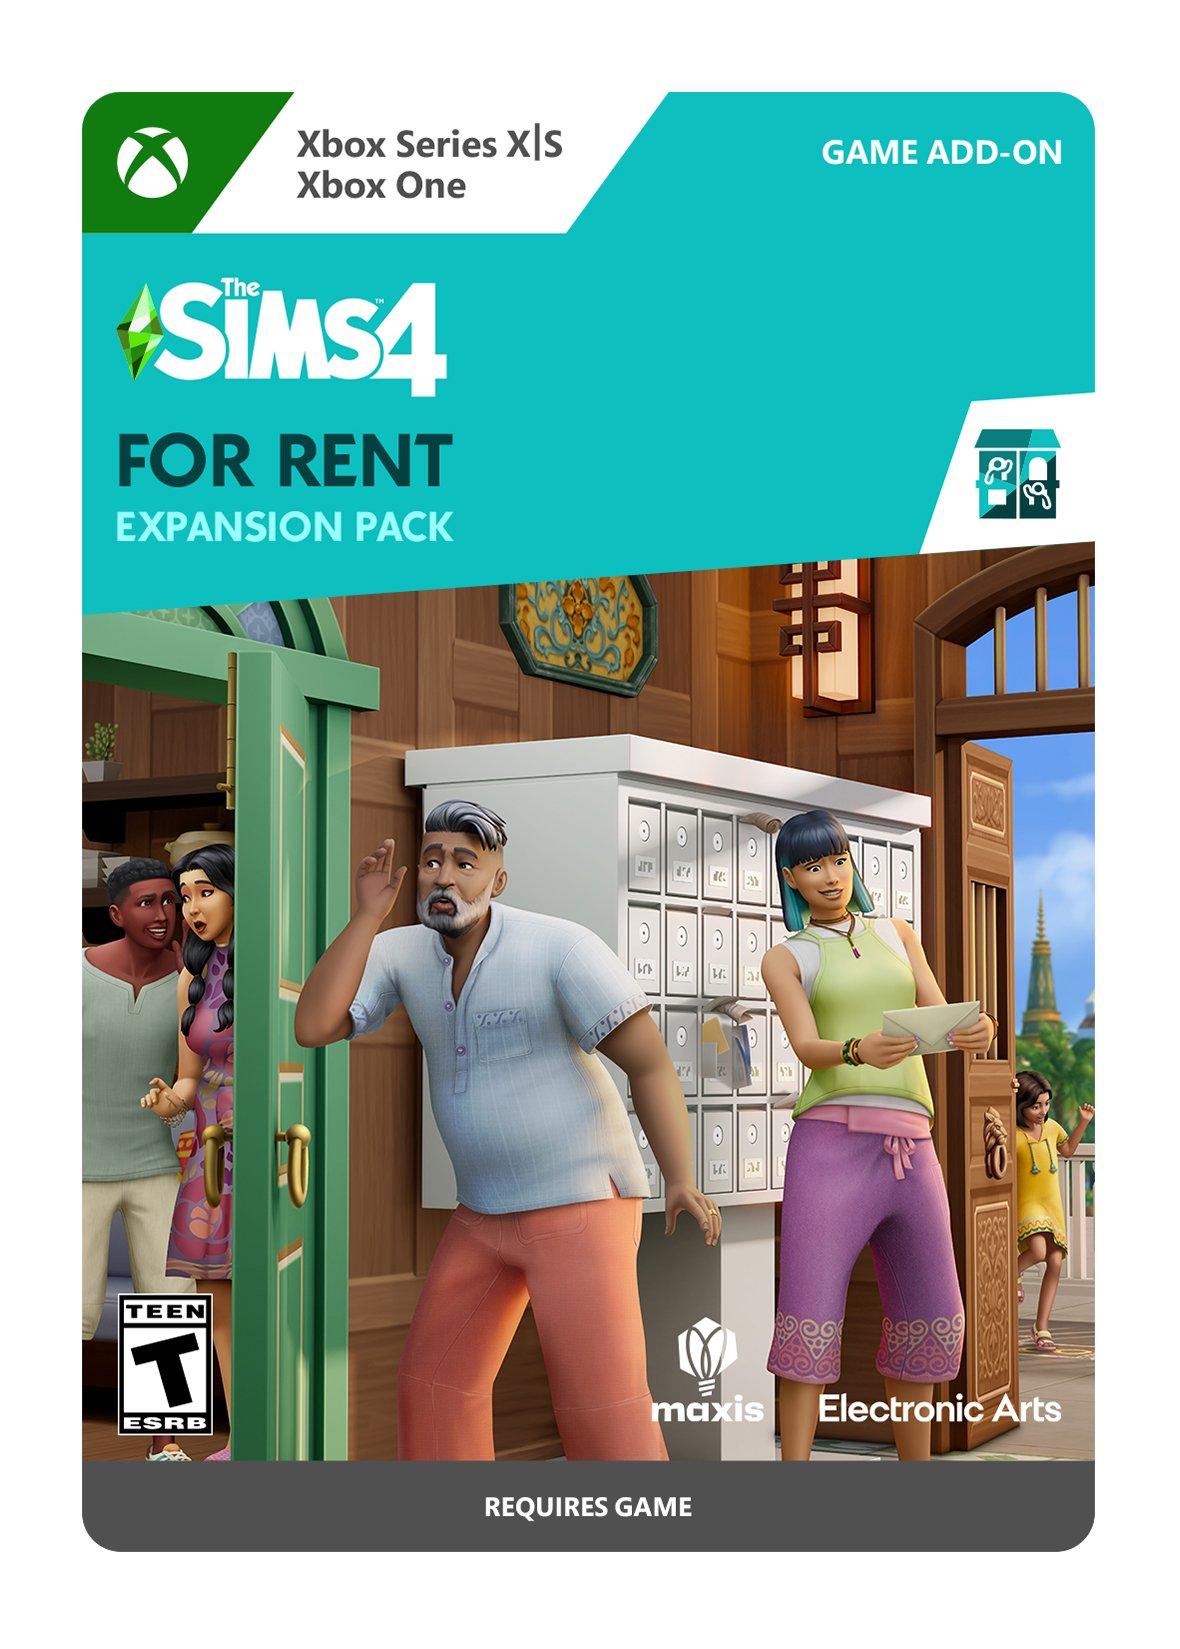 The Sims 4 For Rent Expansion Pack DLC - Xbox Series X/S, Xbox One